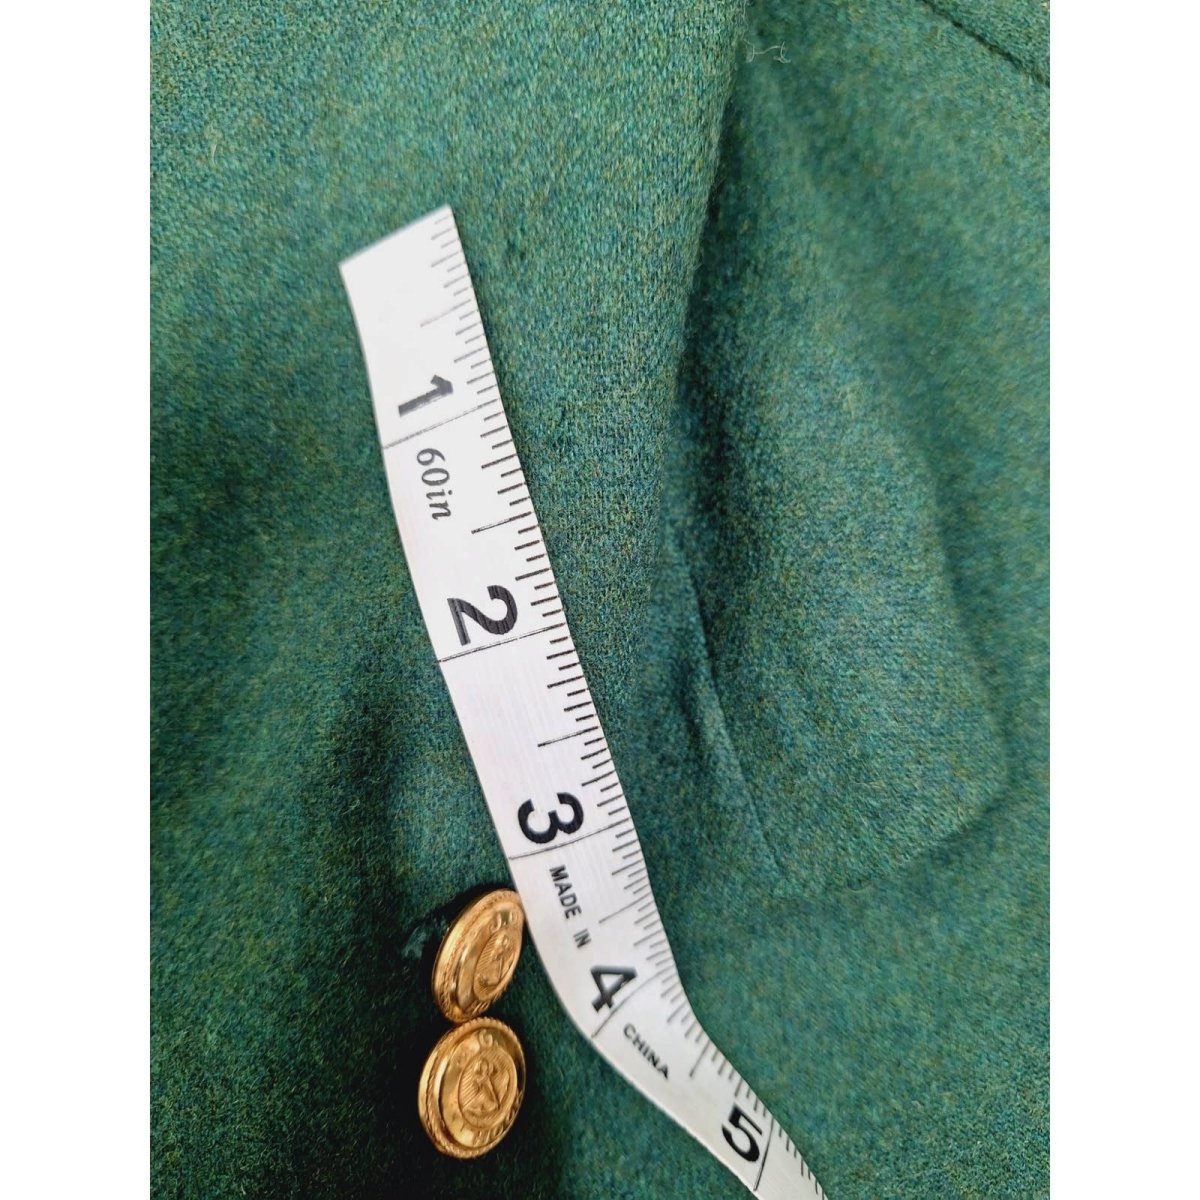 70s/80s Green Monochrome Anchor Button 3 Piece Skirt Suit Size 6 34/28/40 - themallvintage The Mall Vintage